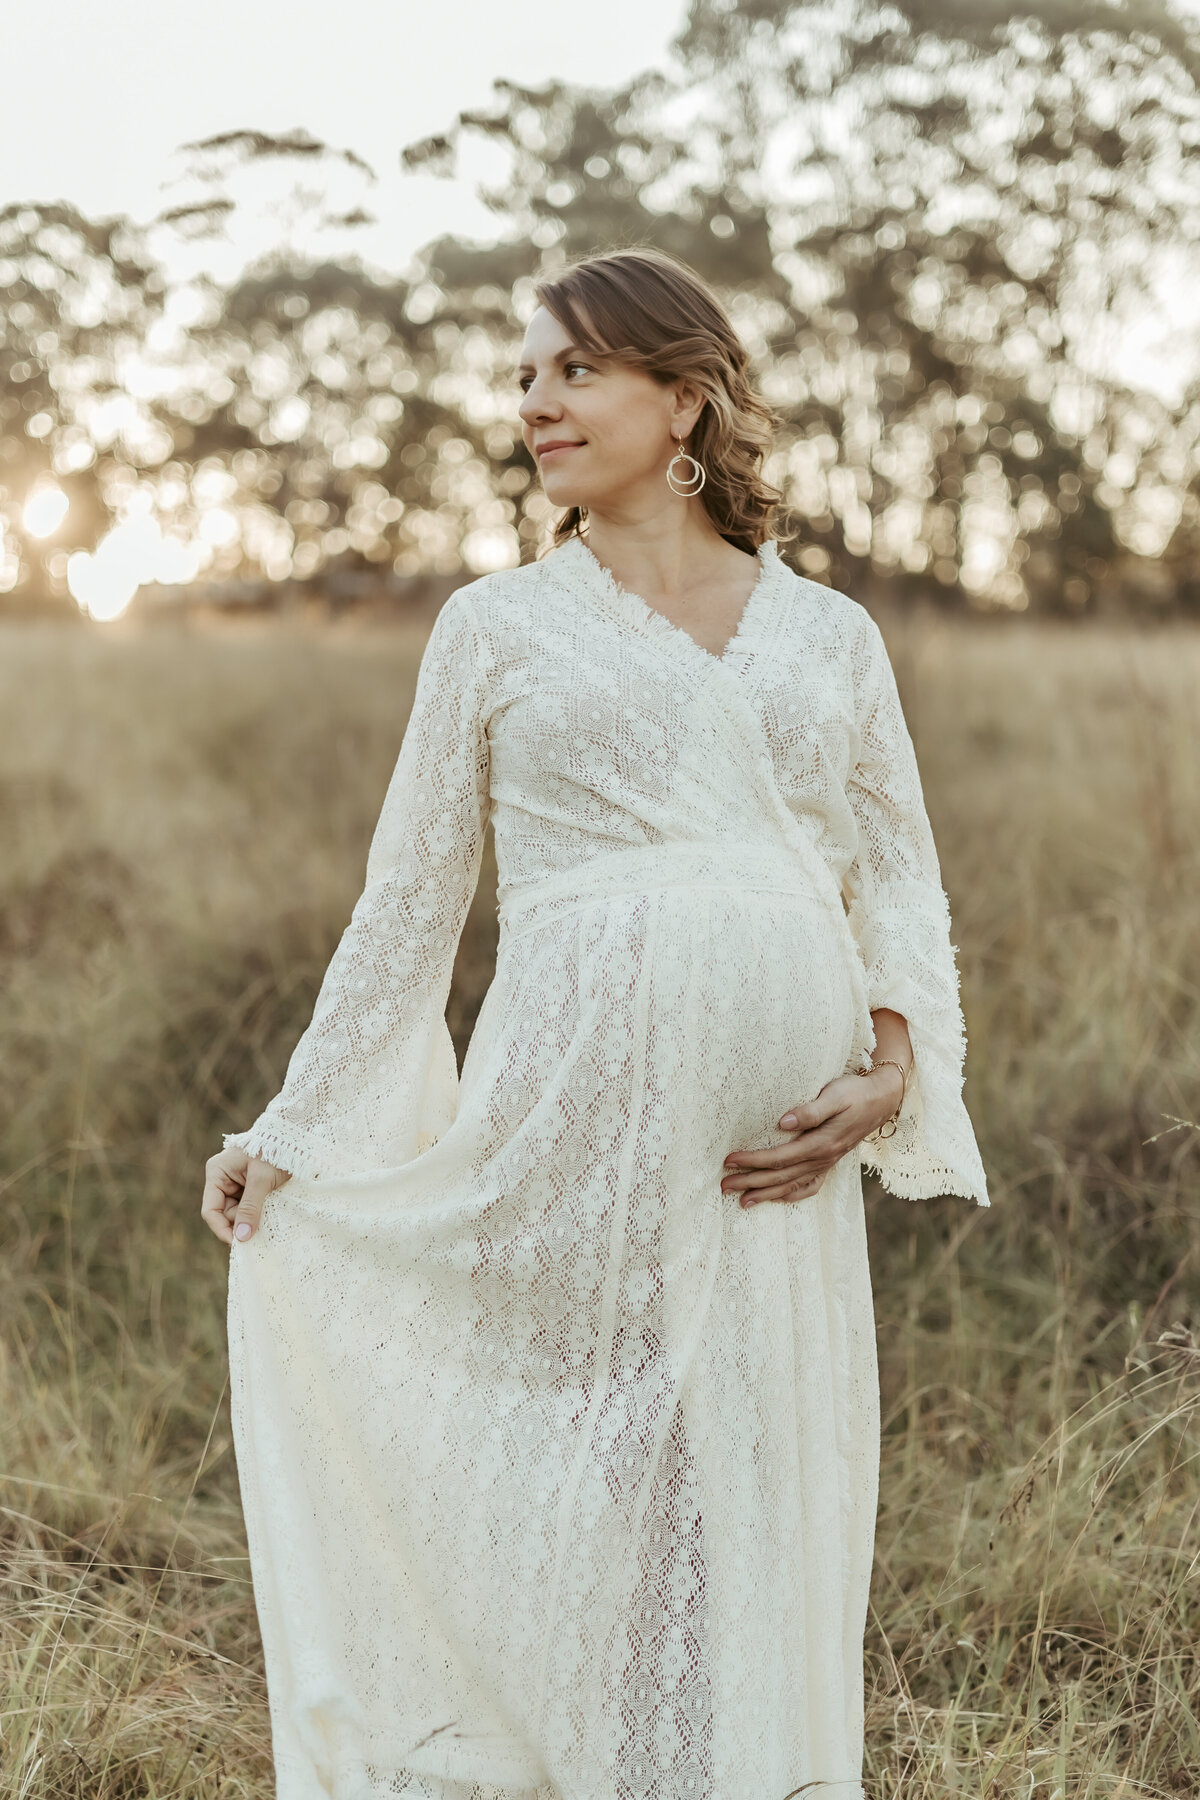 Pregnant woman in a lovely white lace robe smiling and holding her baby bump in a beautiful grassy outdoor location